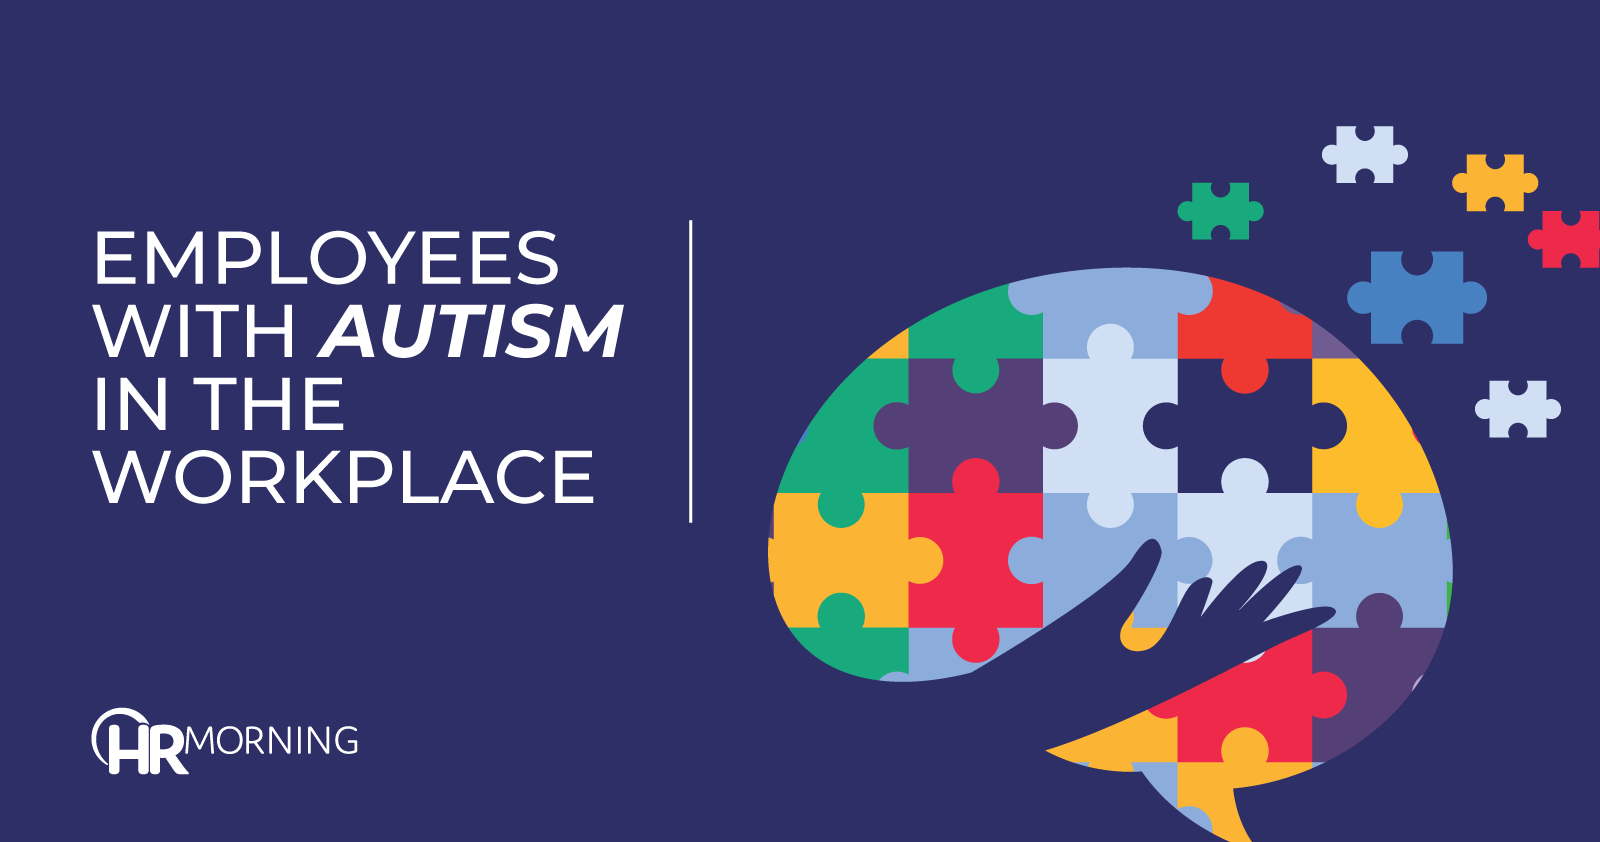 Employees with autism in the workplace